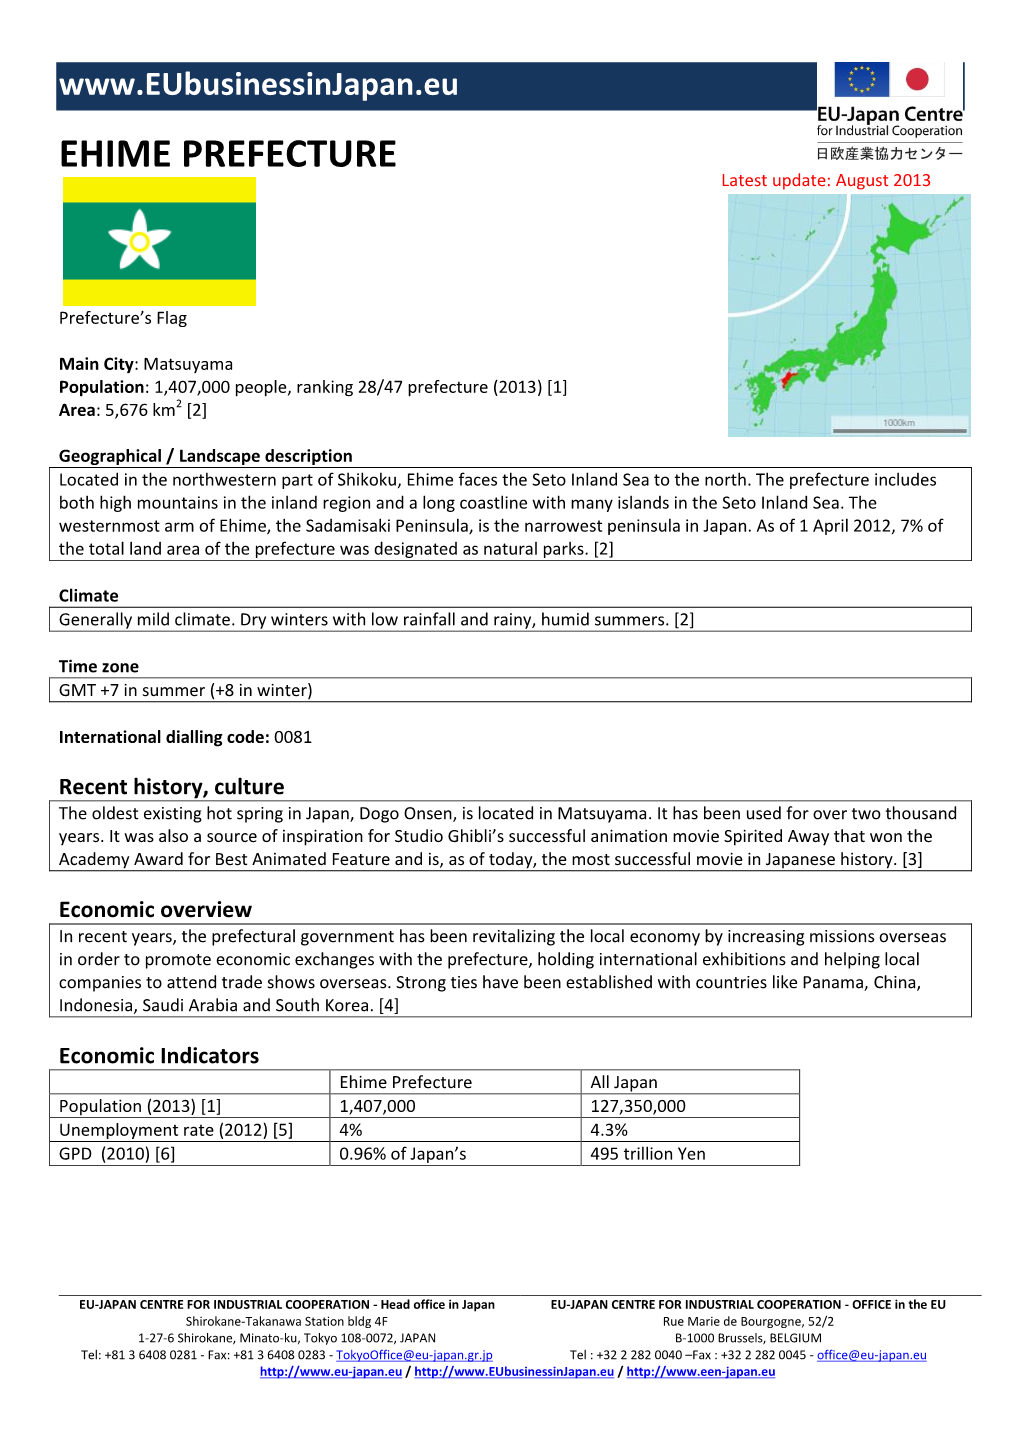 EHIME PREFECTURE Latest Update: August 2013